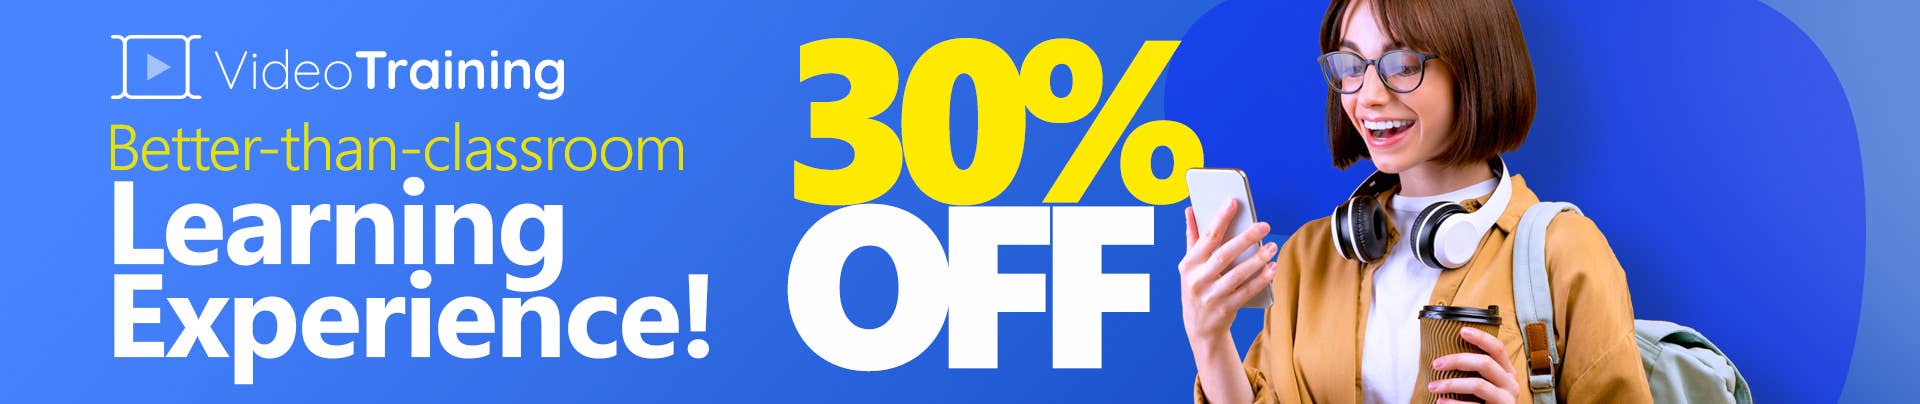 30% Off on All Video Training